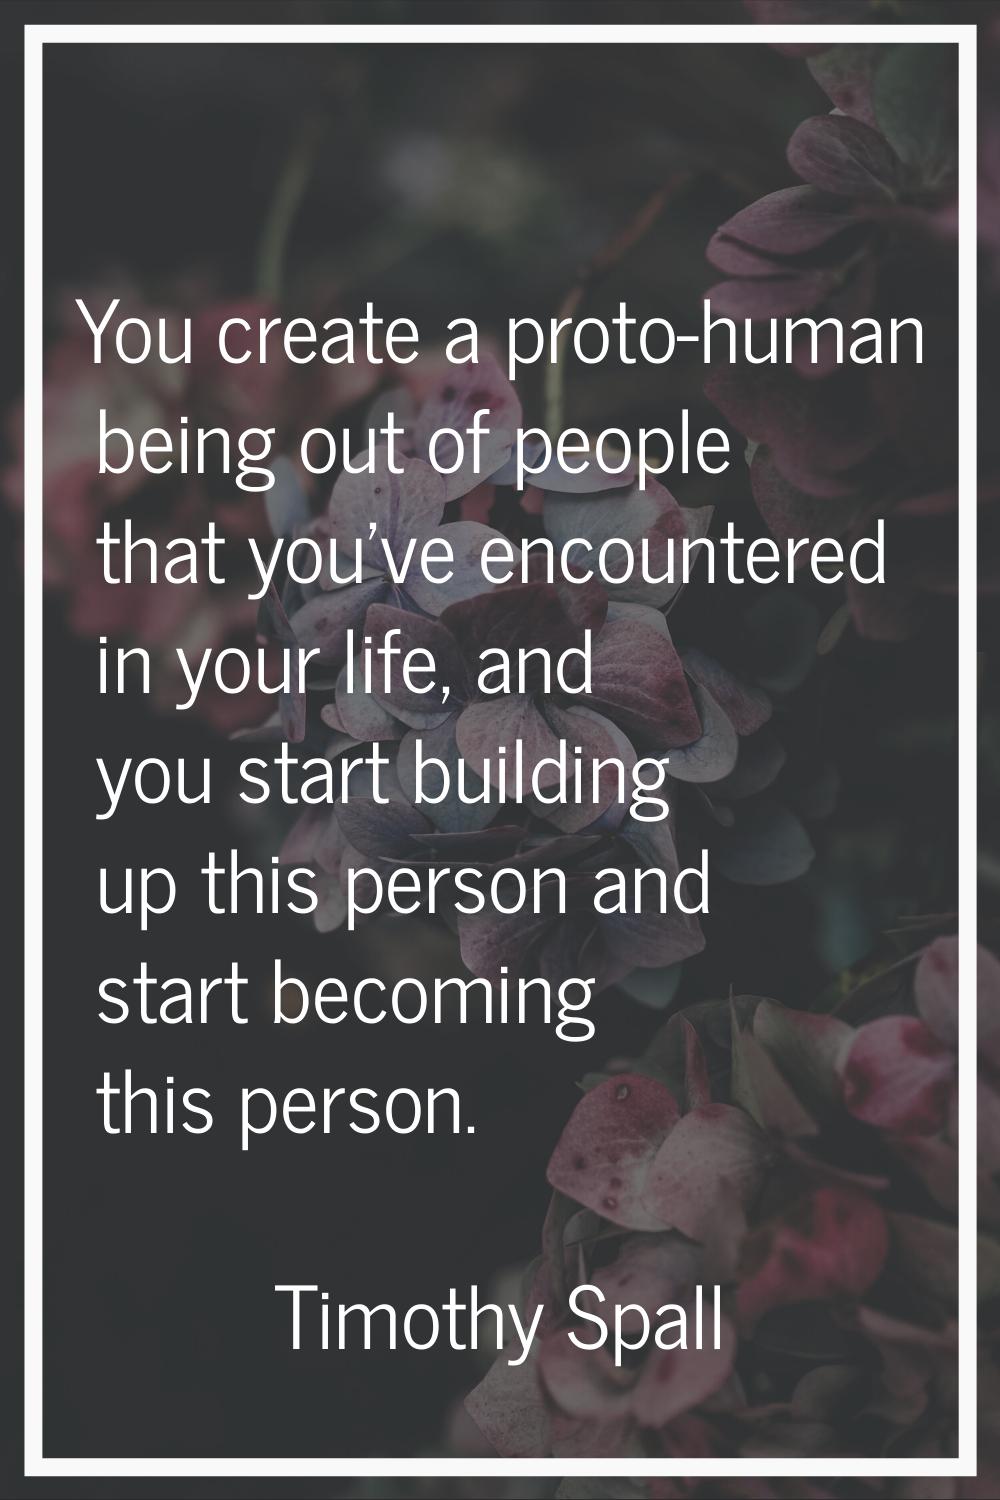 You create a proto-human being out of people that you've encountered in your life, and you start bu